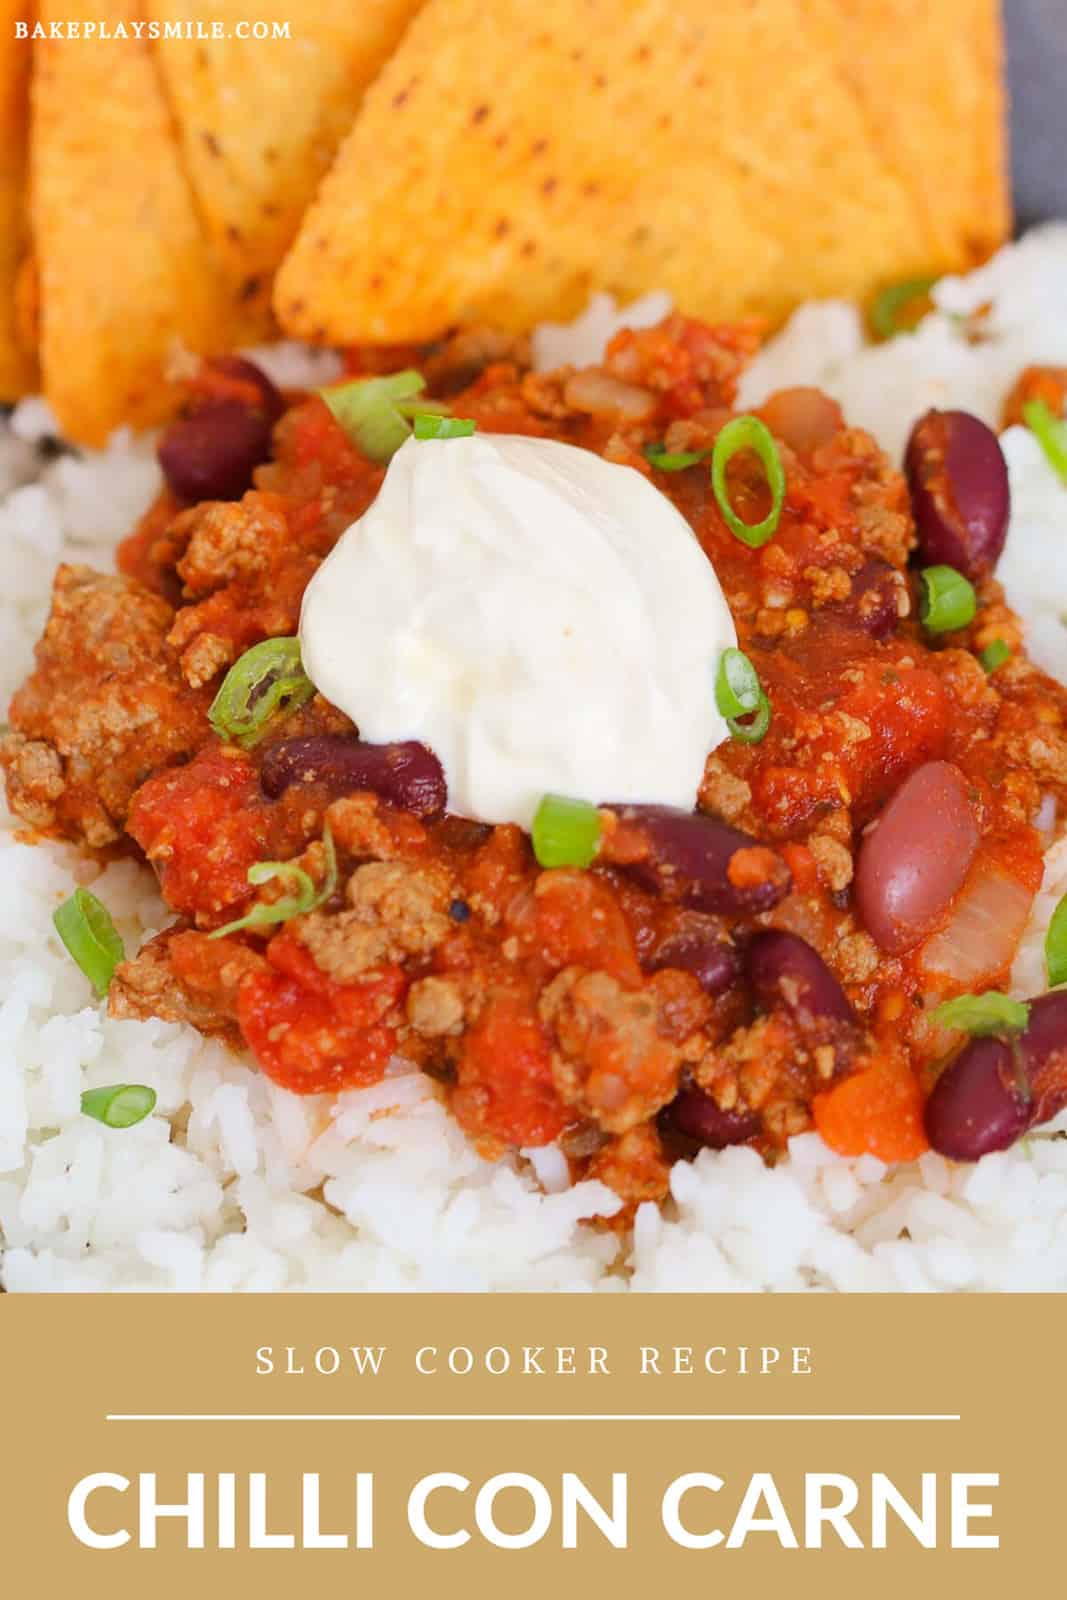 Slow Cooker Chilli Con Carne Bake Play Smile